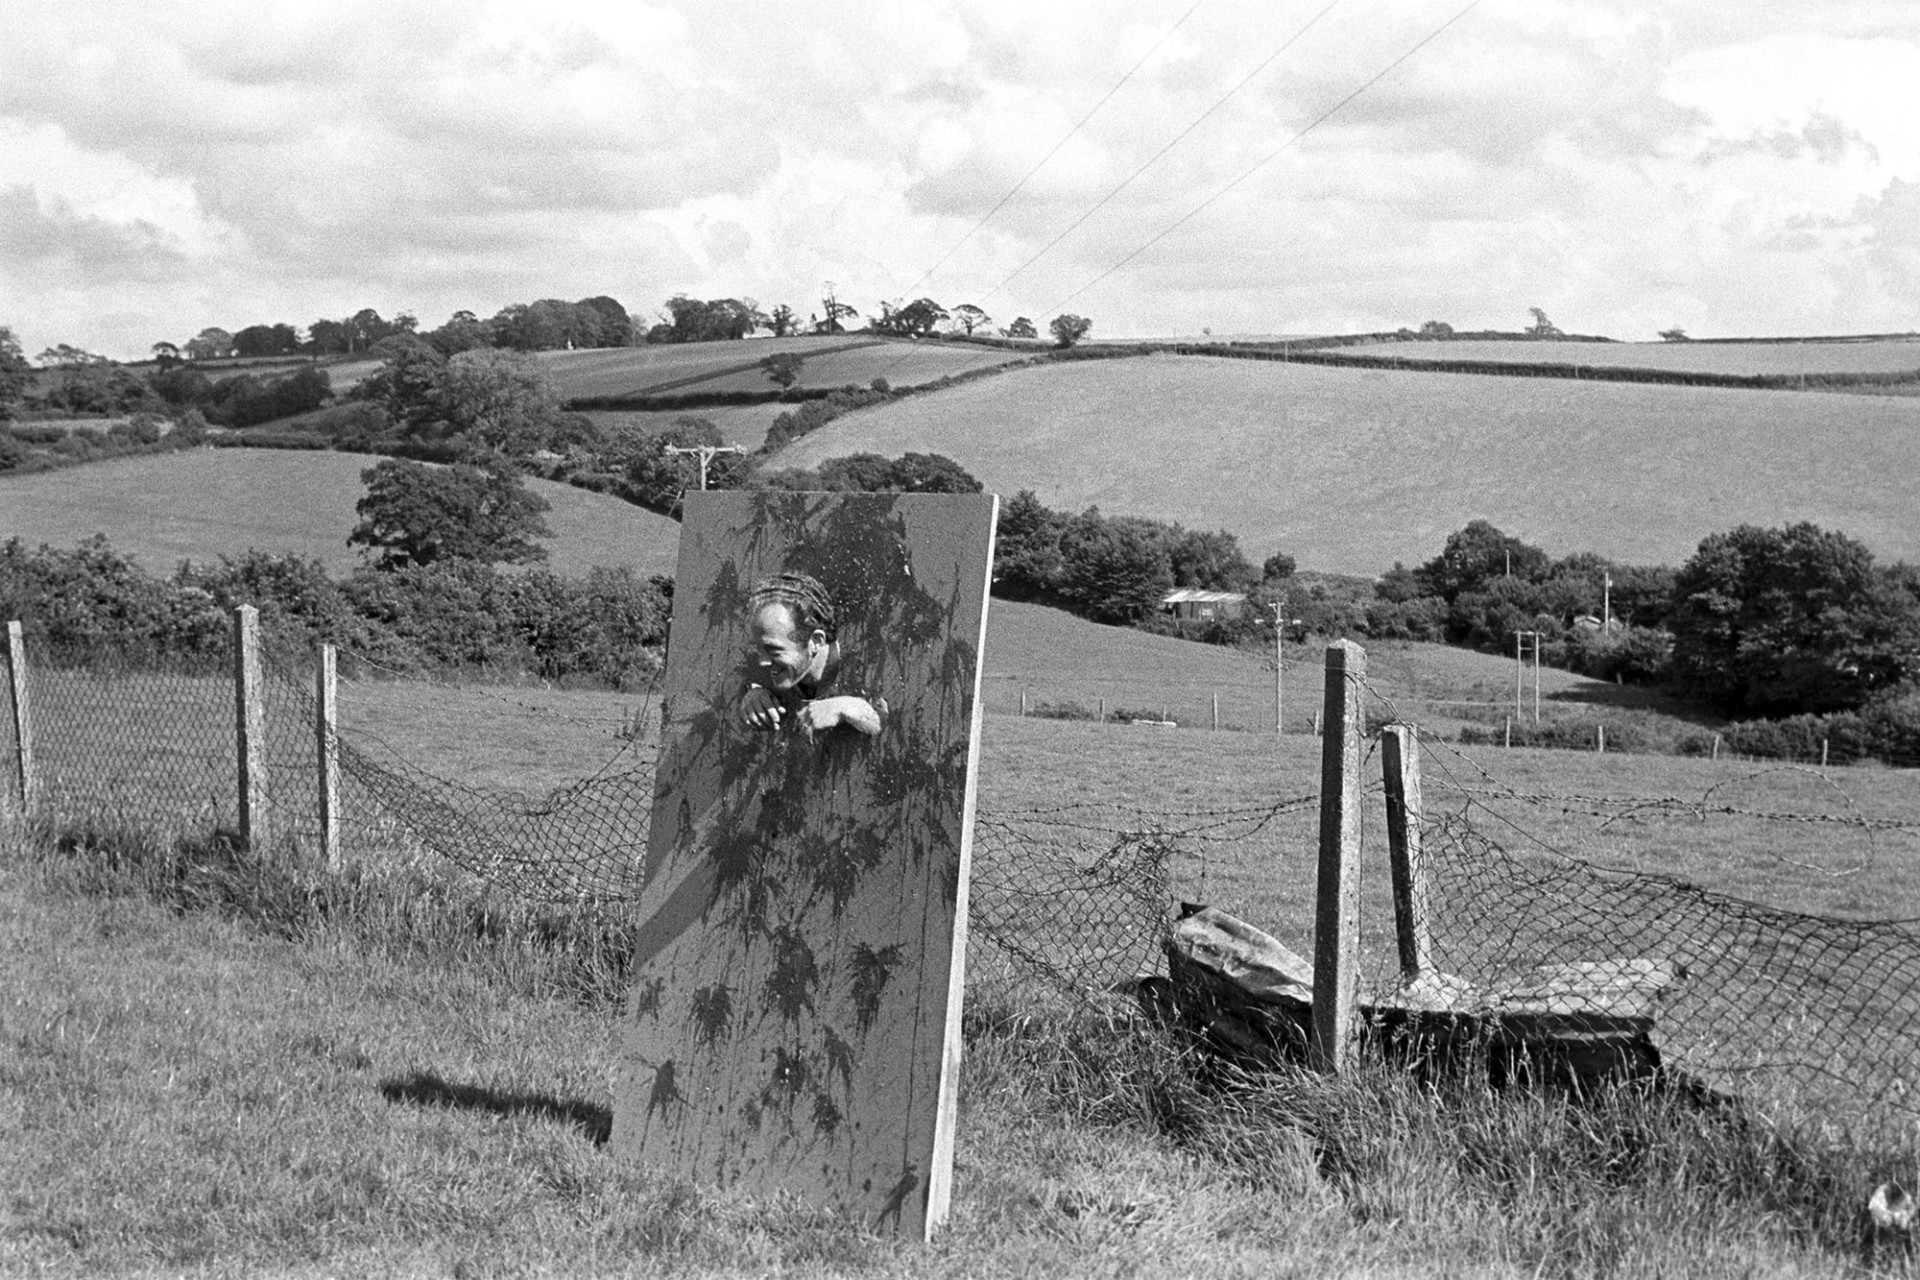 Man having tomatoes thrown at himself in stocks. 
[Man in stocks having tomatoes thrown at him at Chittlehampton pageant. A landscape of trees, field and hedgerows is in the background.]